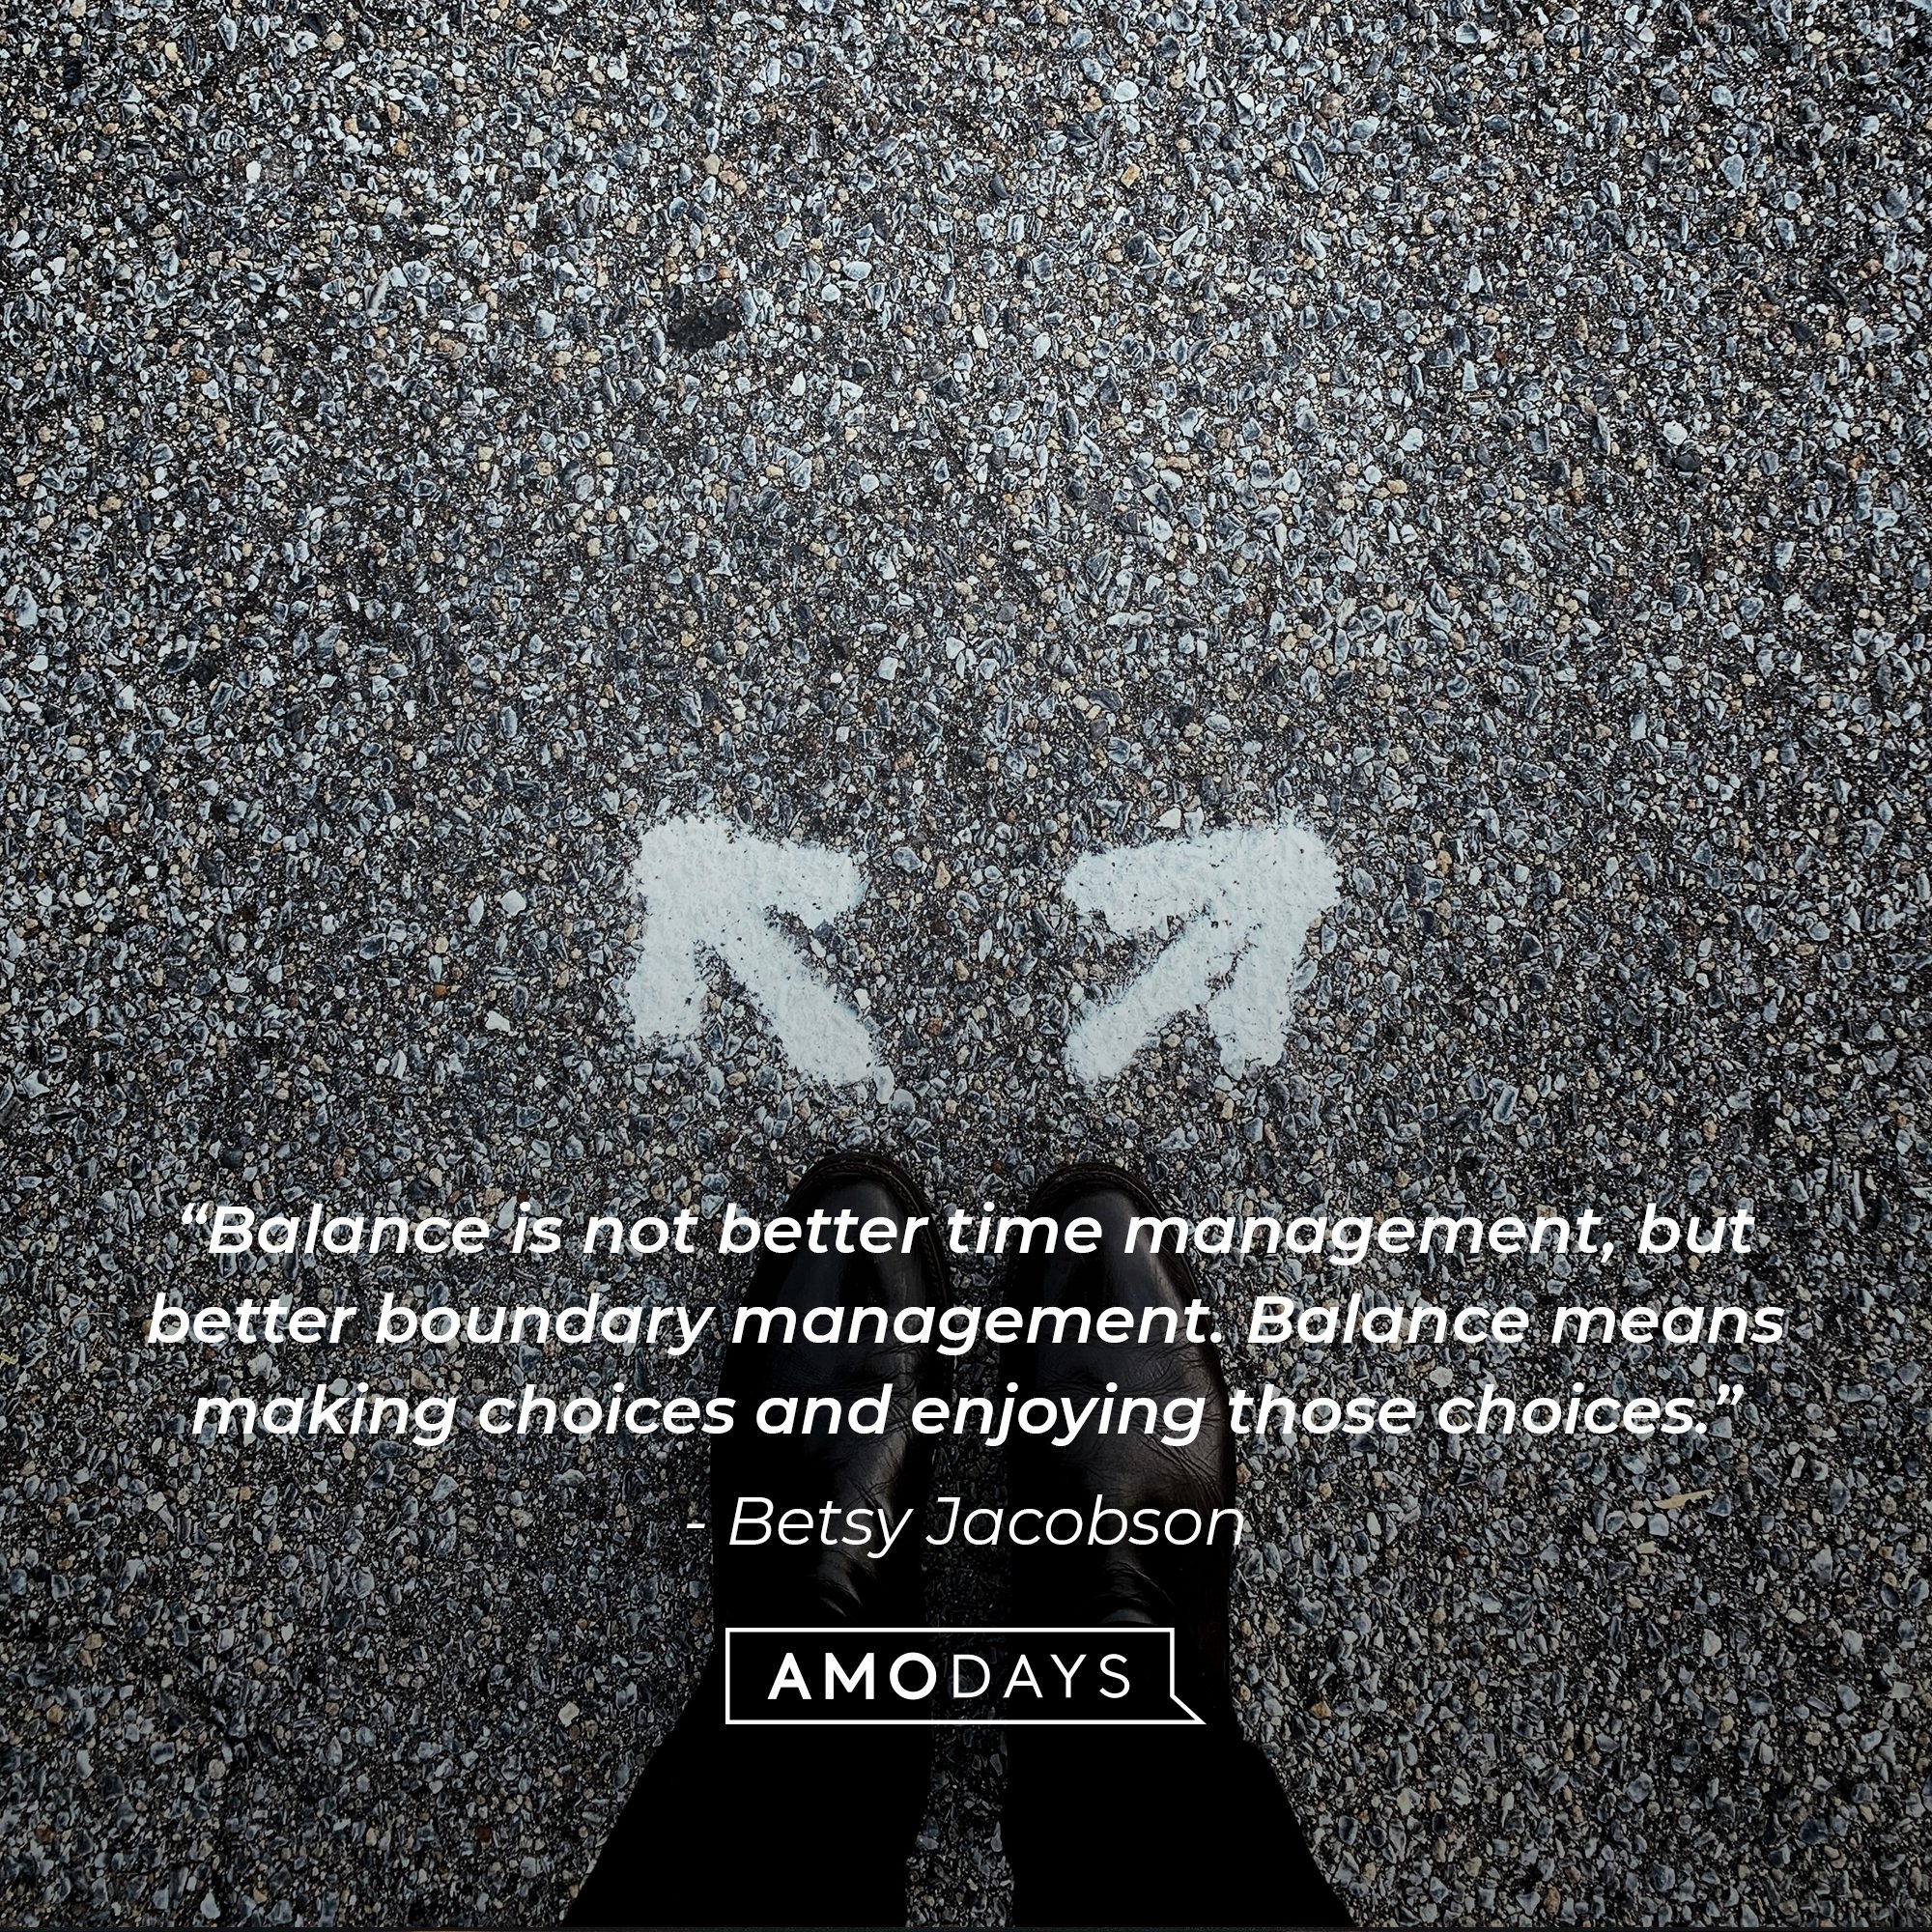  Betsy Jacobson's quote: “Balance is not better time management, but better boundary management. Balance means making choices and enjoying those choices.” | Image: AmoDays